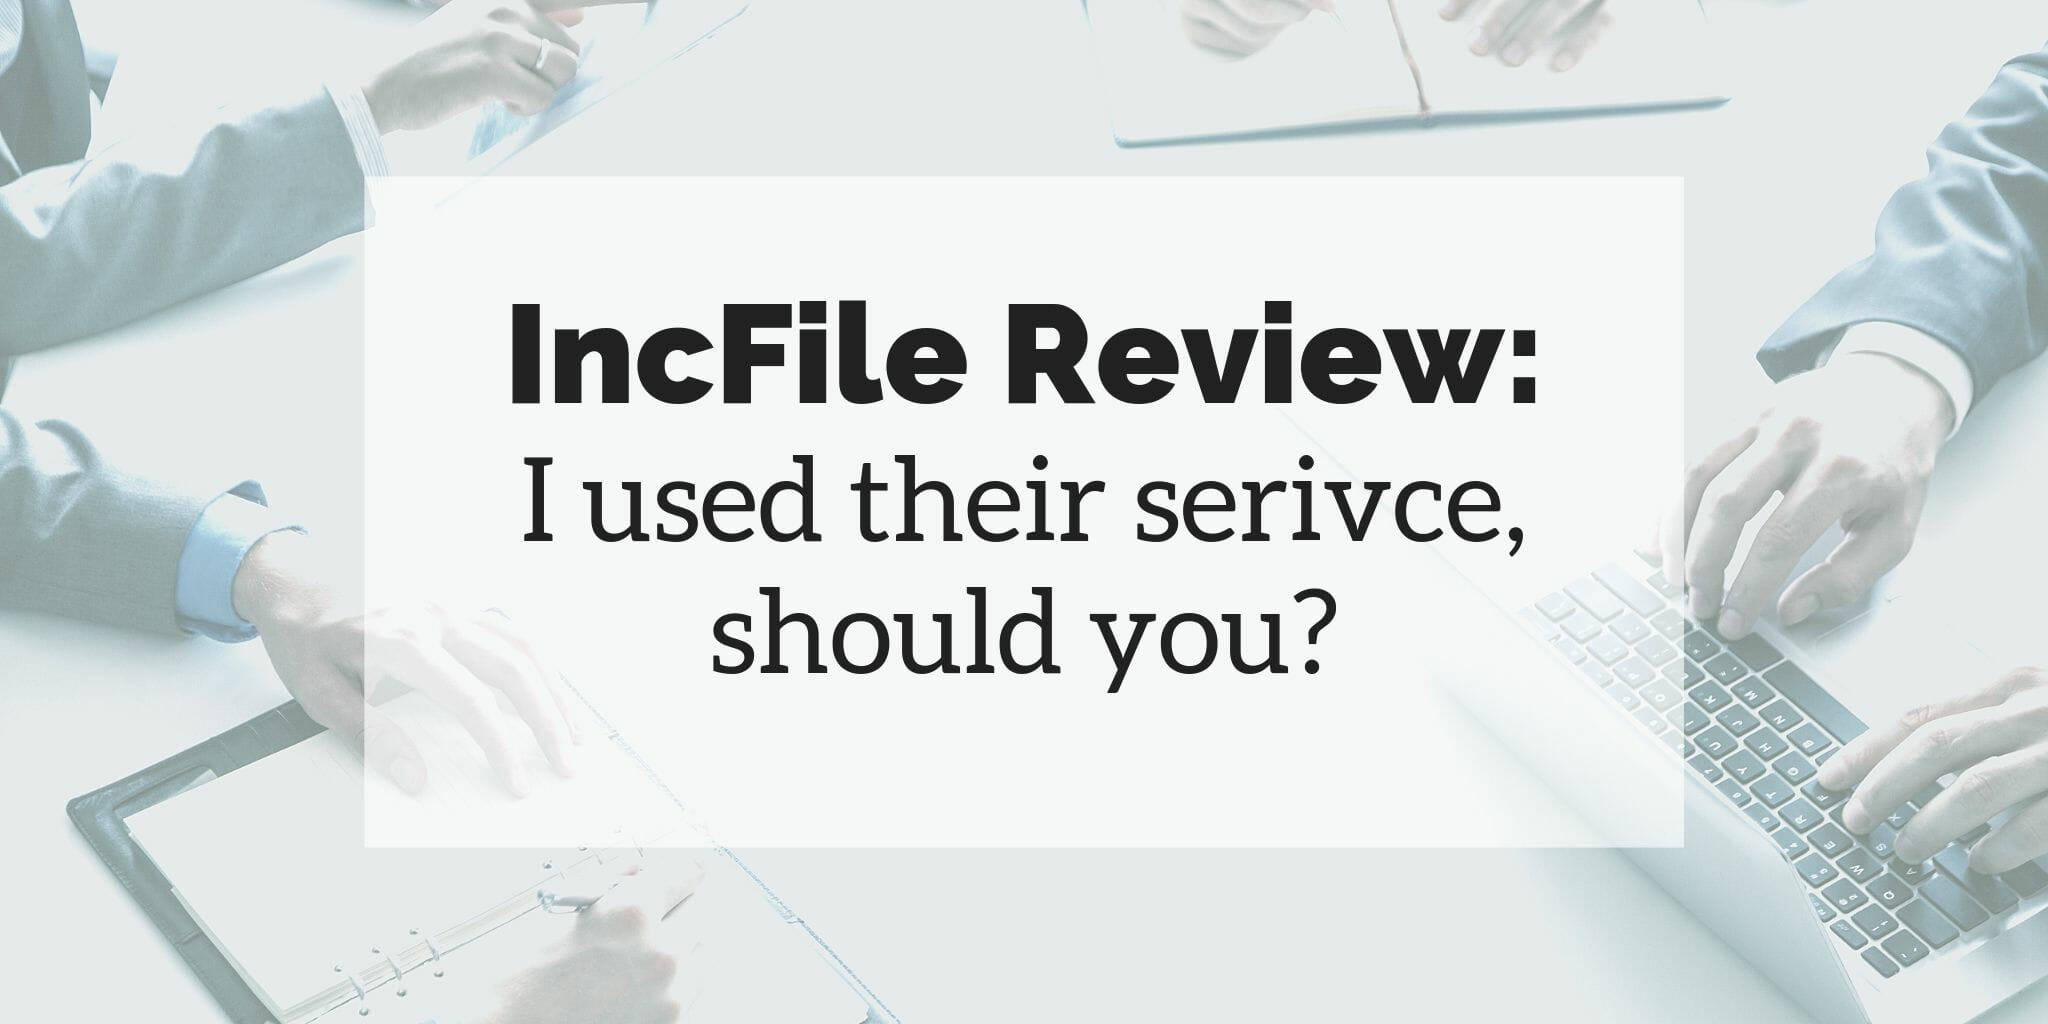 What Does Incfile Review Mean?